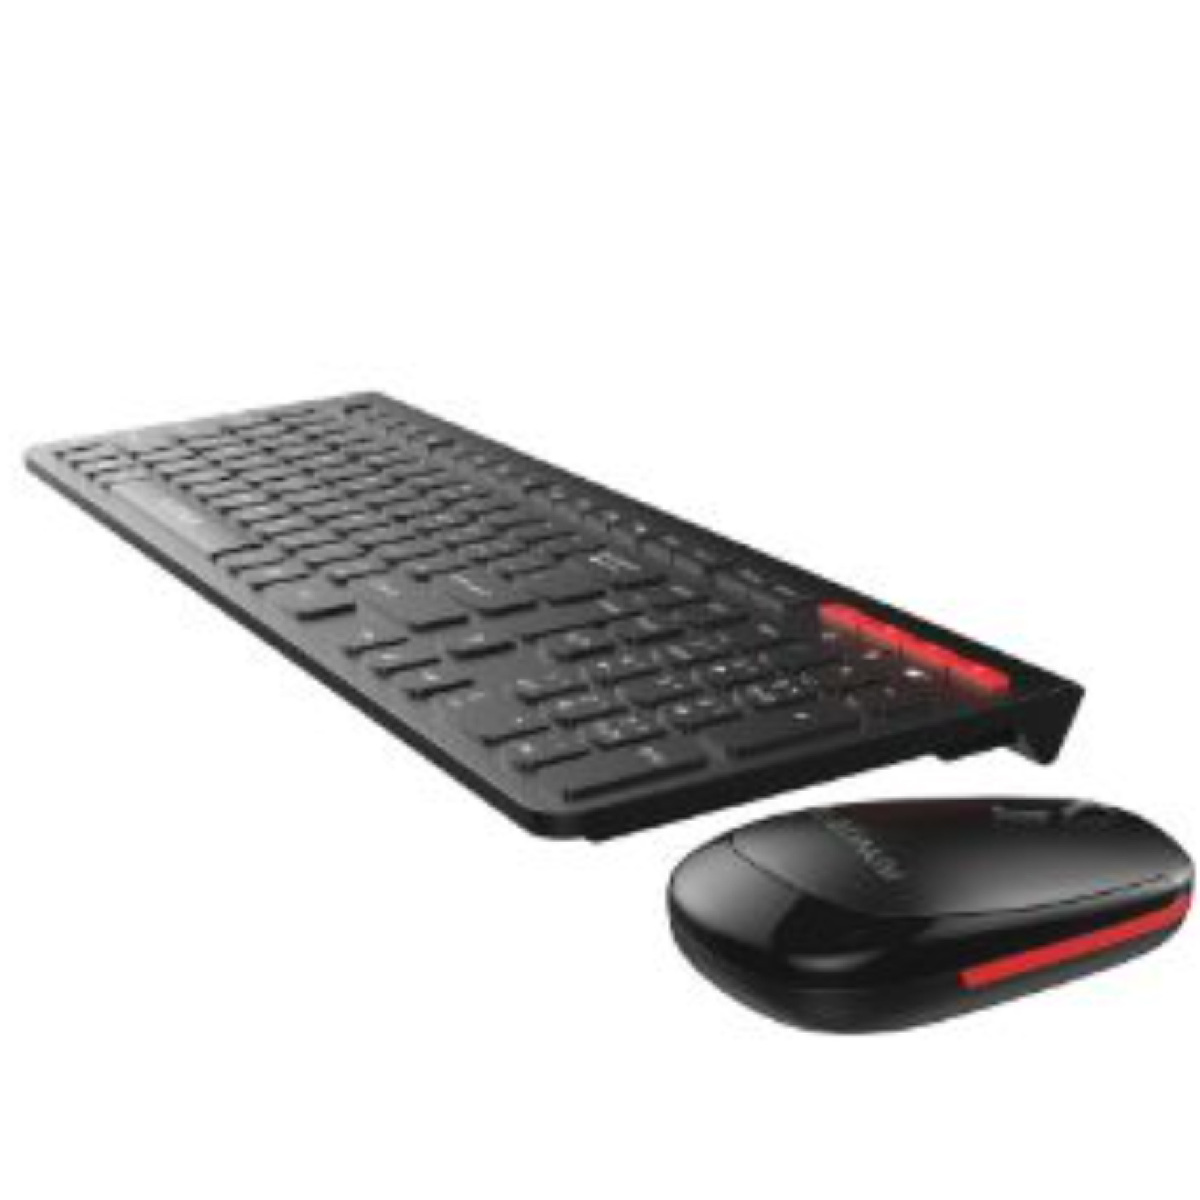 Platinum Wireless Keyboard and Mouse COWLKBMRB